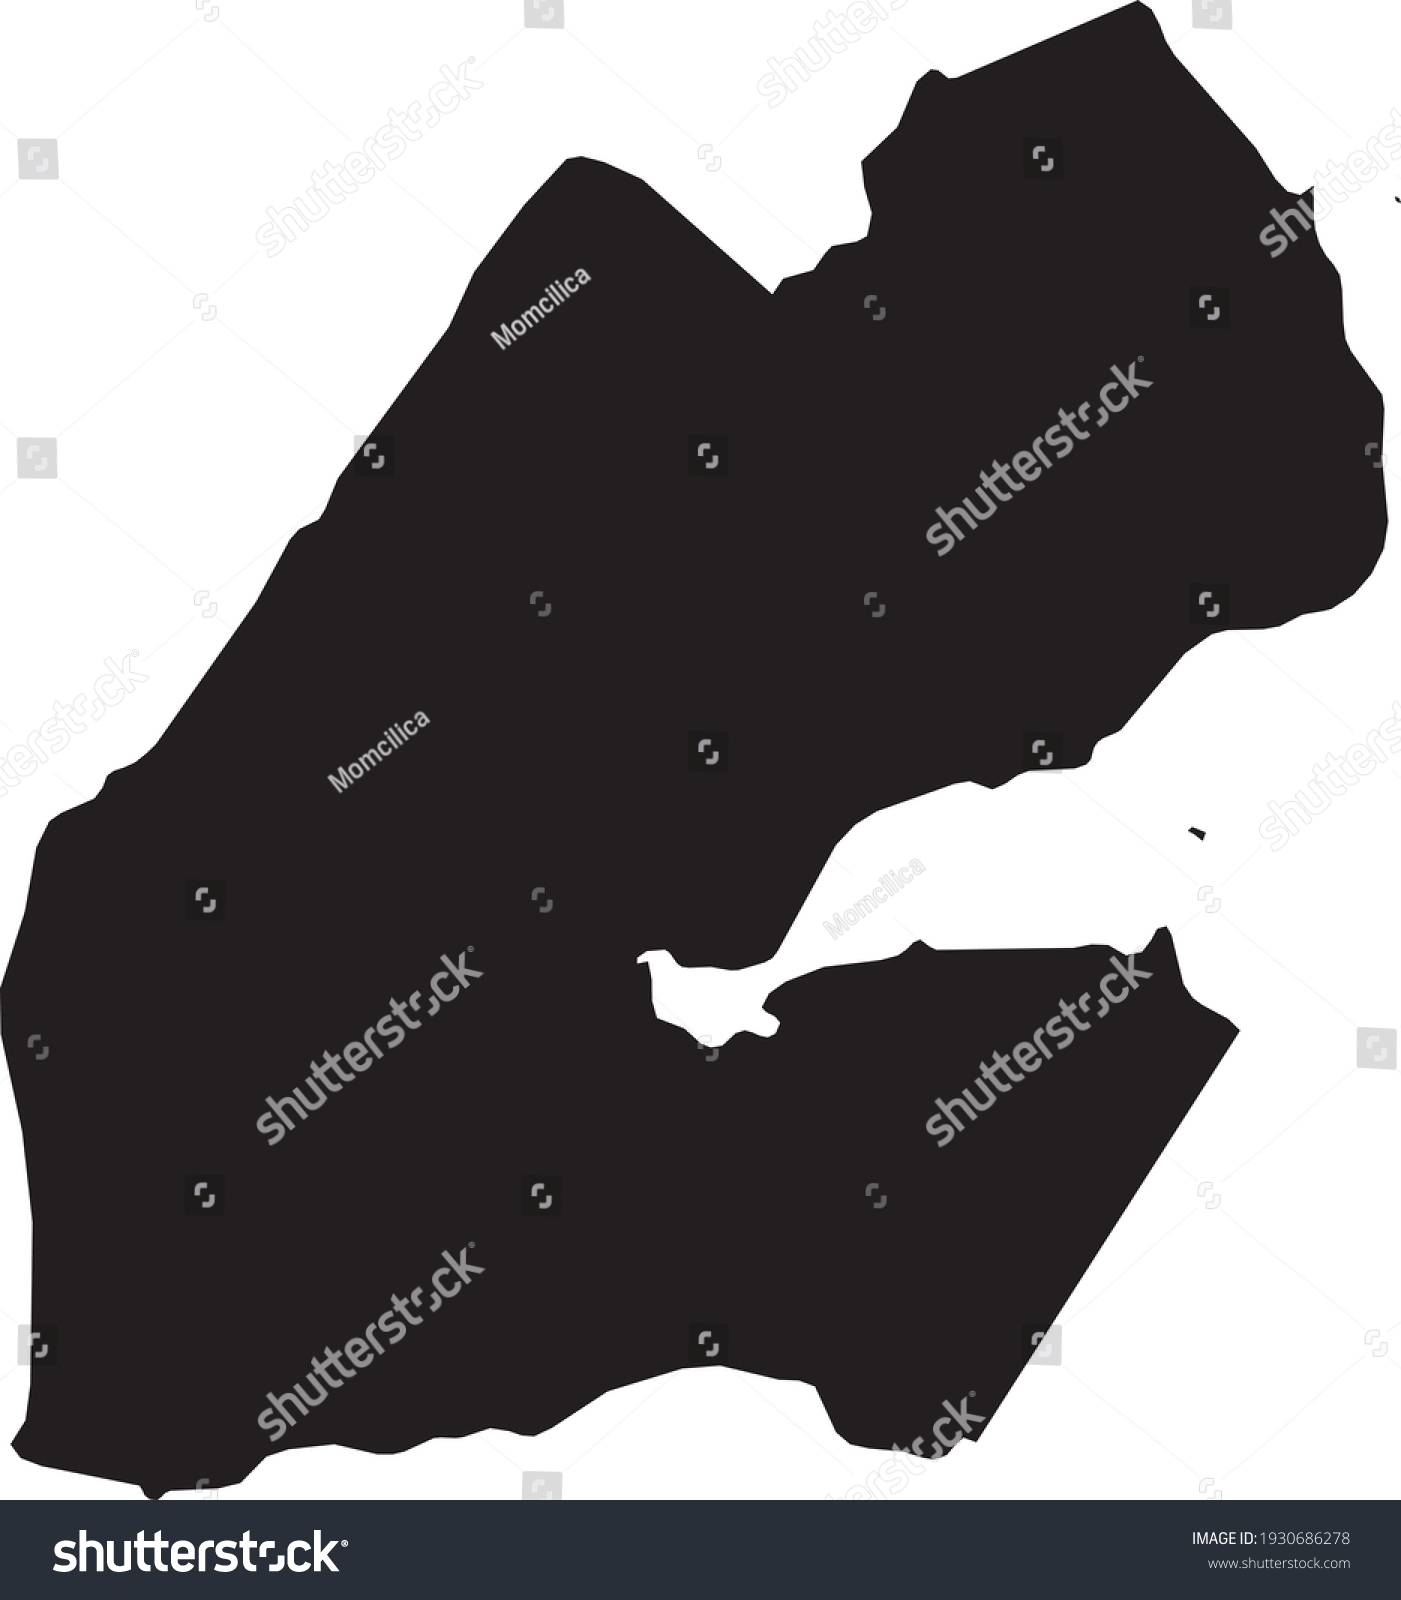 SVG of Simple black vector map of the Republic of Djibouti svg